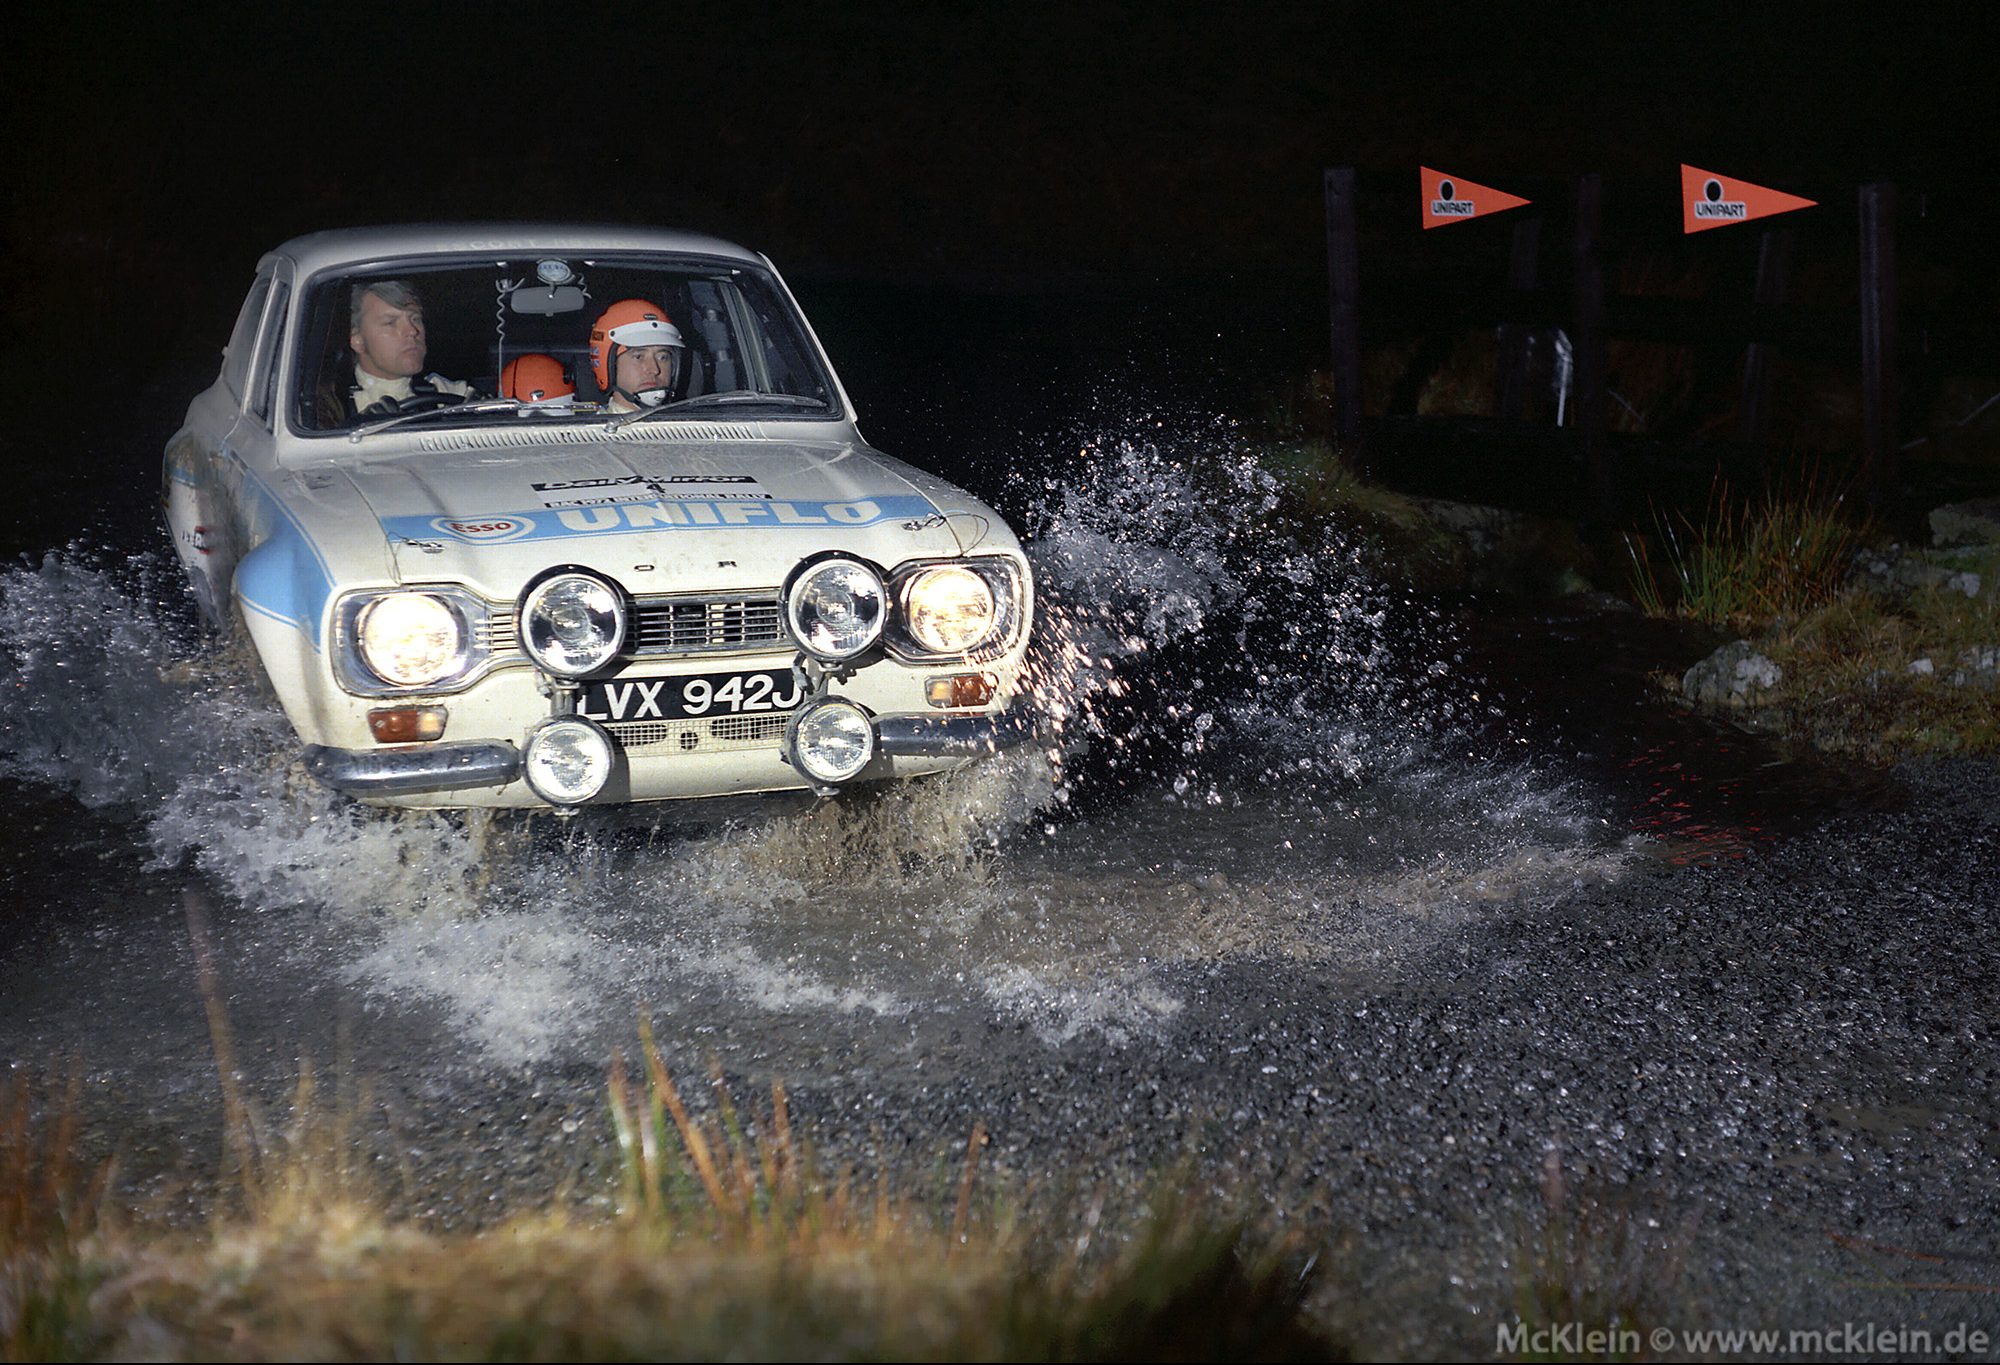 Winning ways: How the Ford Escort dominated the RAC Rally, 50 years on